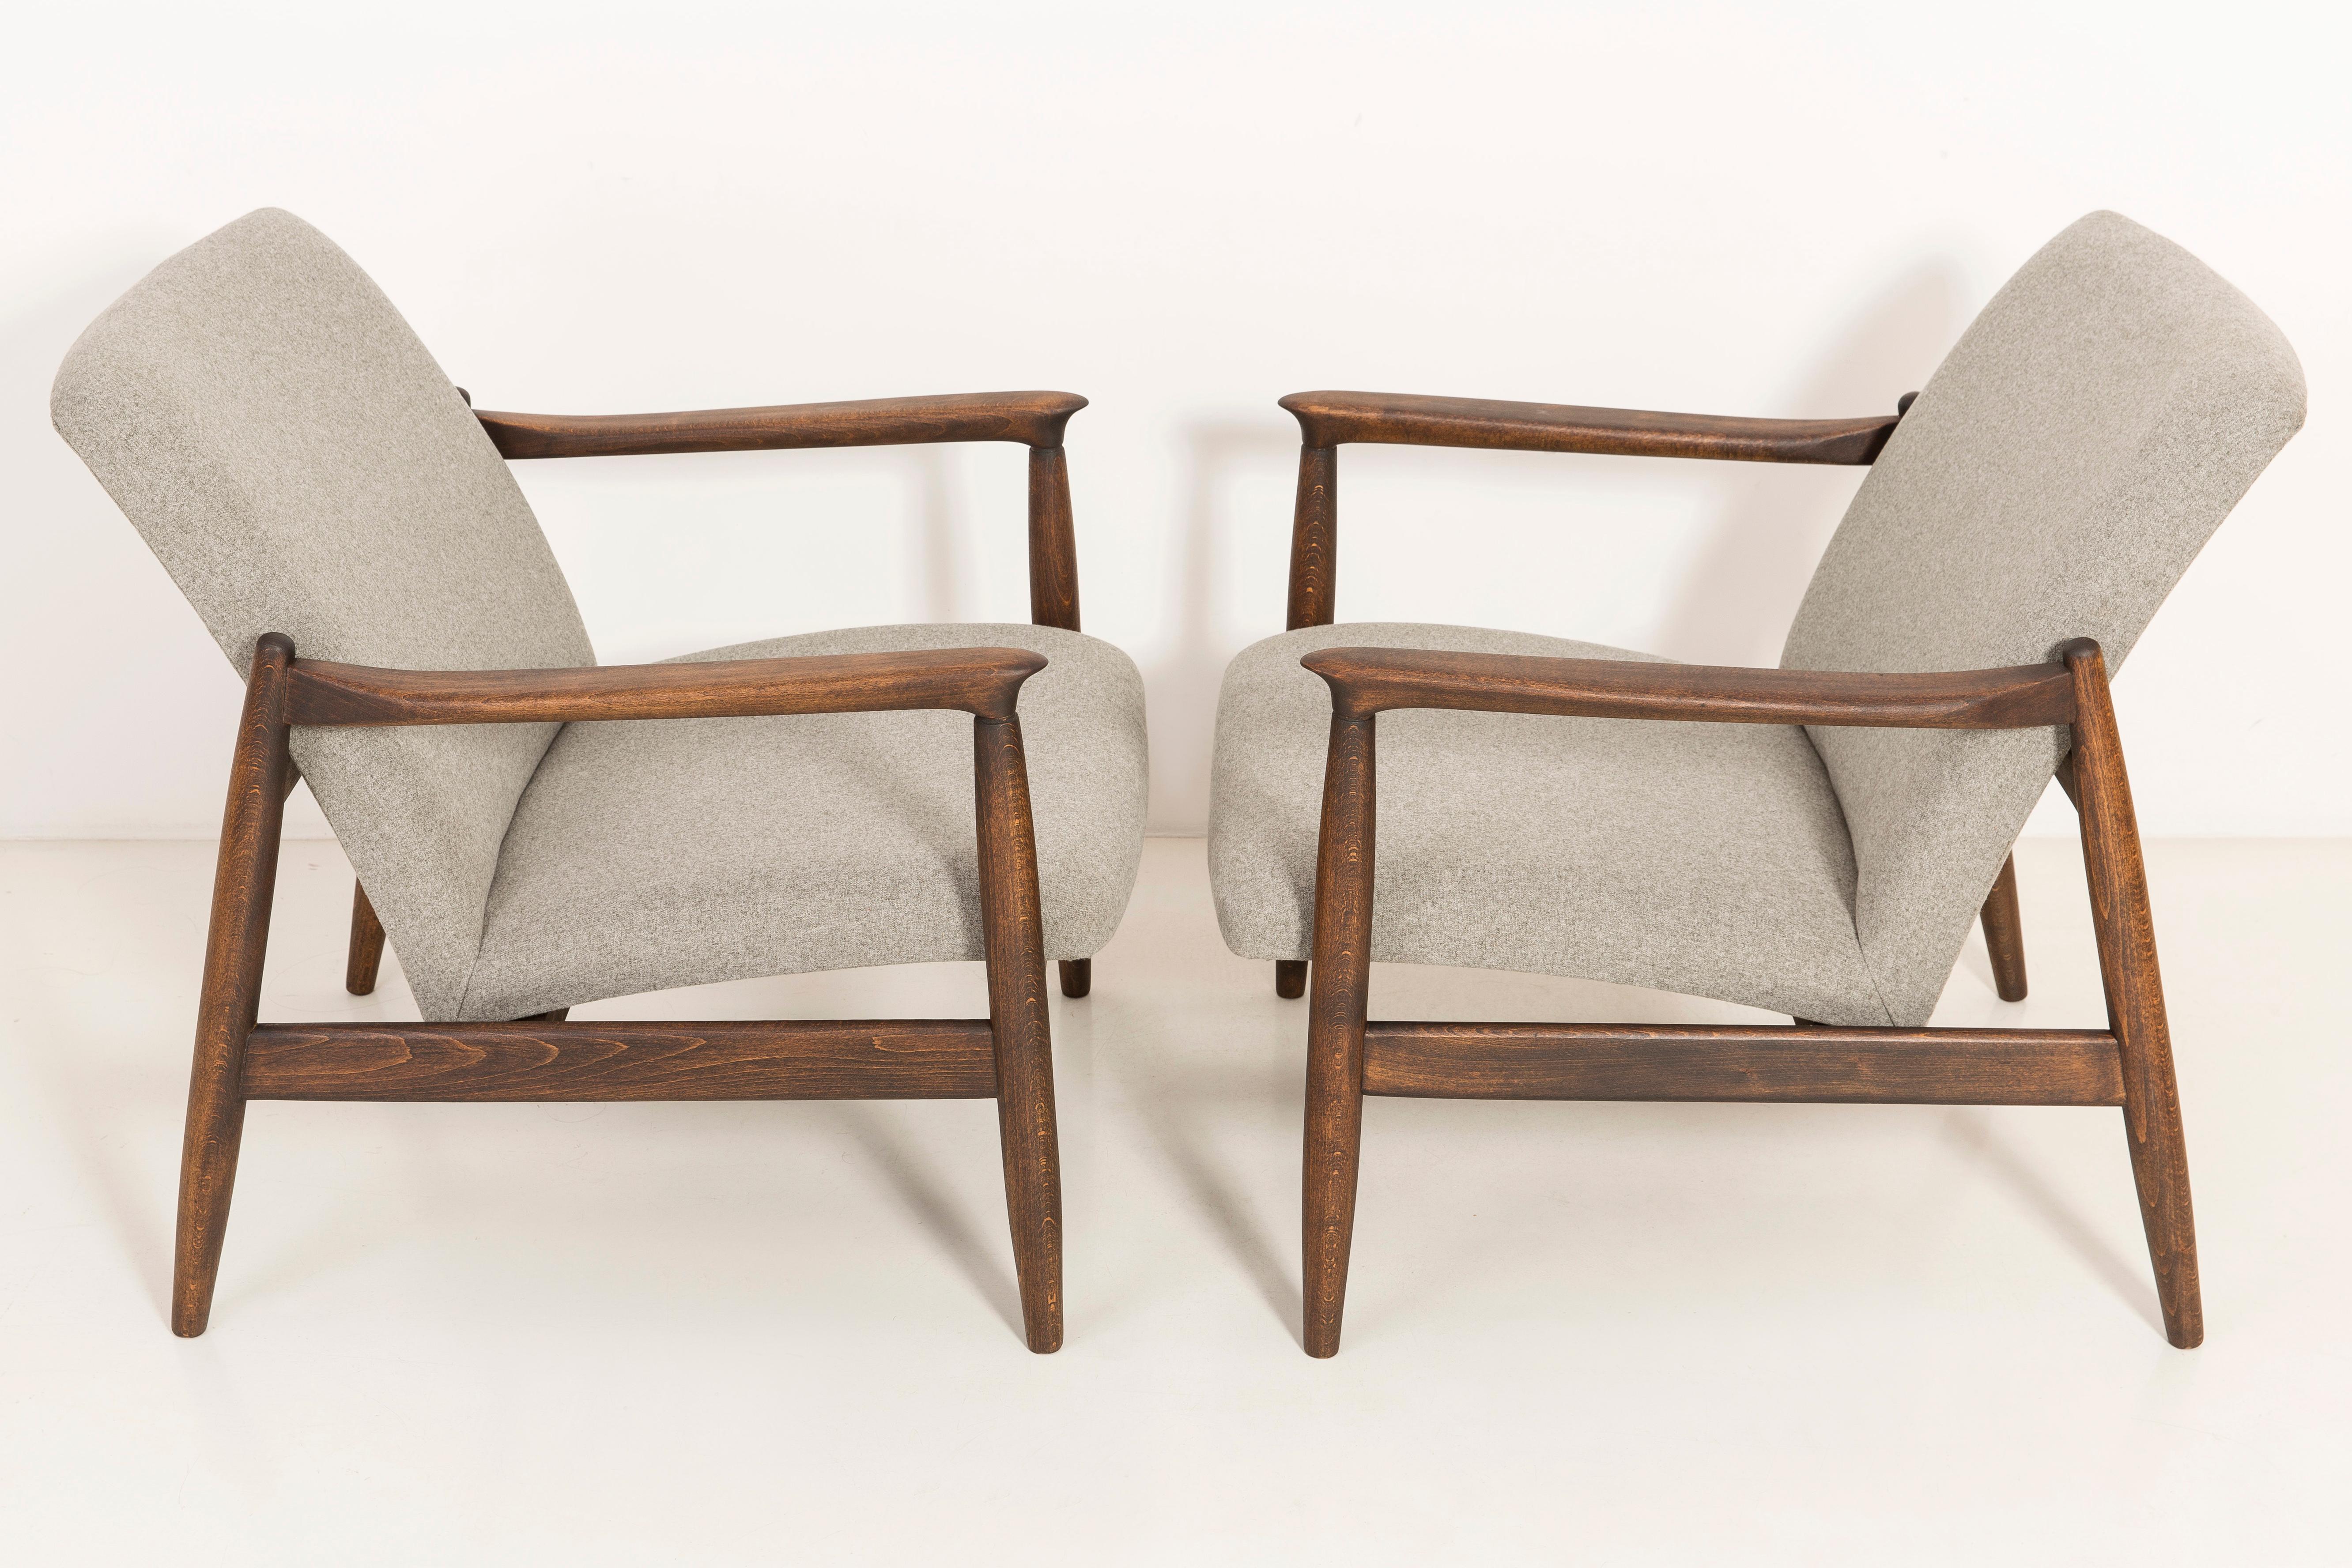 20th Century Pair of Beige Armchairs, Edmund Homa, 1960s For Sale